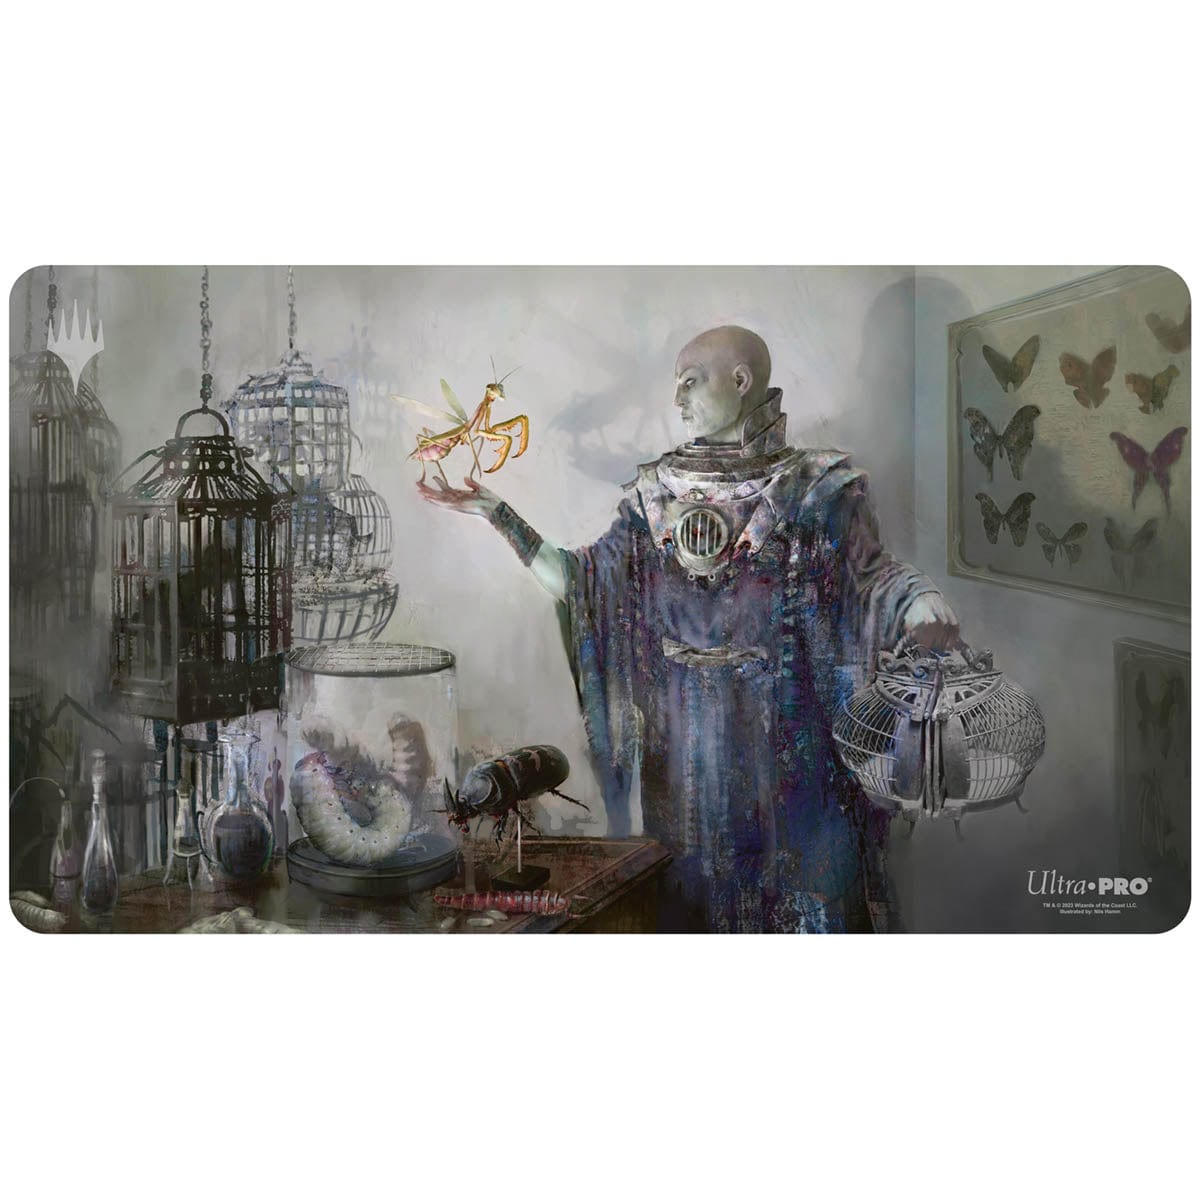 Delver of Secrets Playmat (Limited Edition)